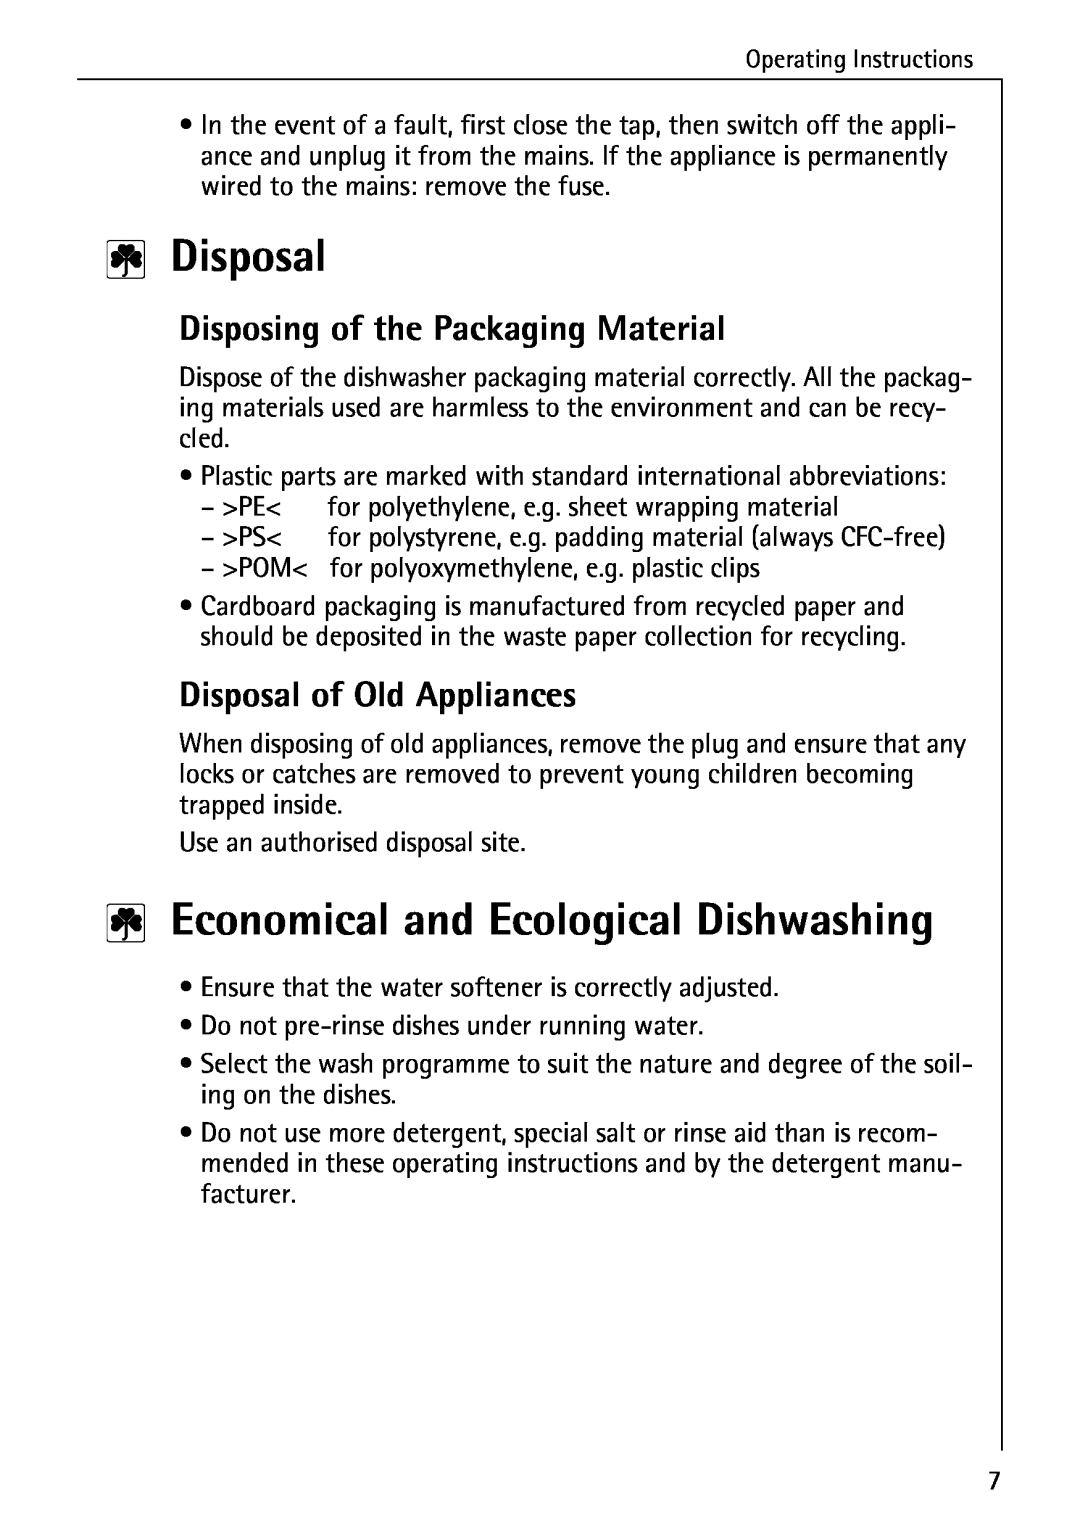 Electrolux 50500 manual Disposal, Economical and Ecological Dishwashing, Disposing of the Packaging Material 